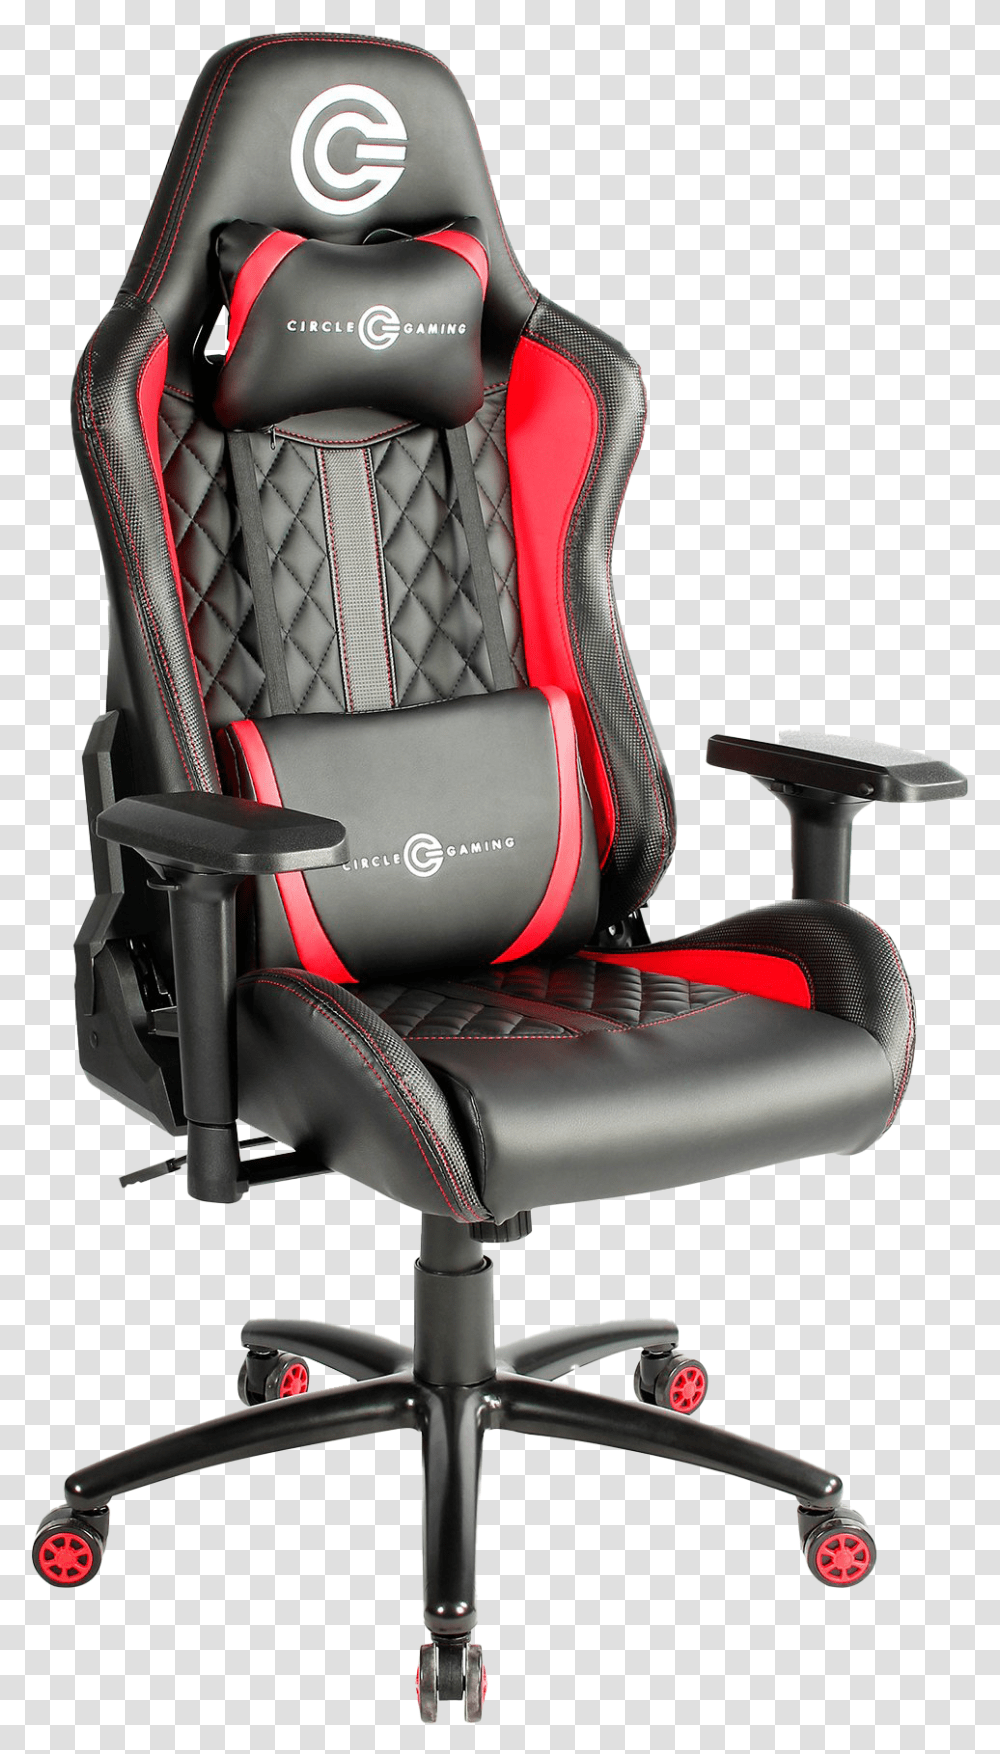 Red Gaming Chair Image Background Circle Gaming Chair, Cushion, Furniture, Car Seat, Headrest Transparent Png